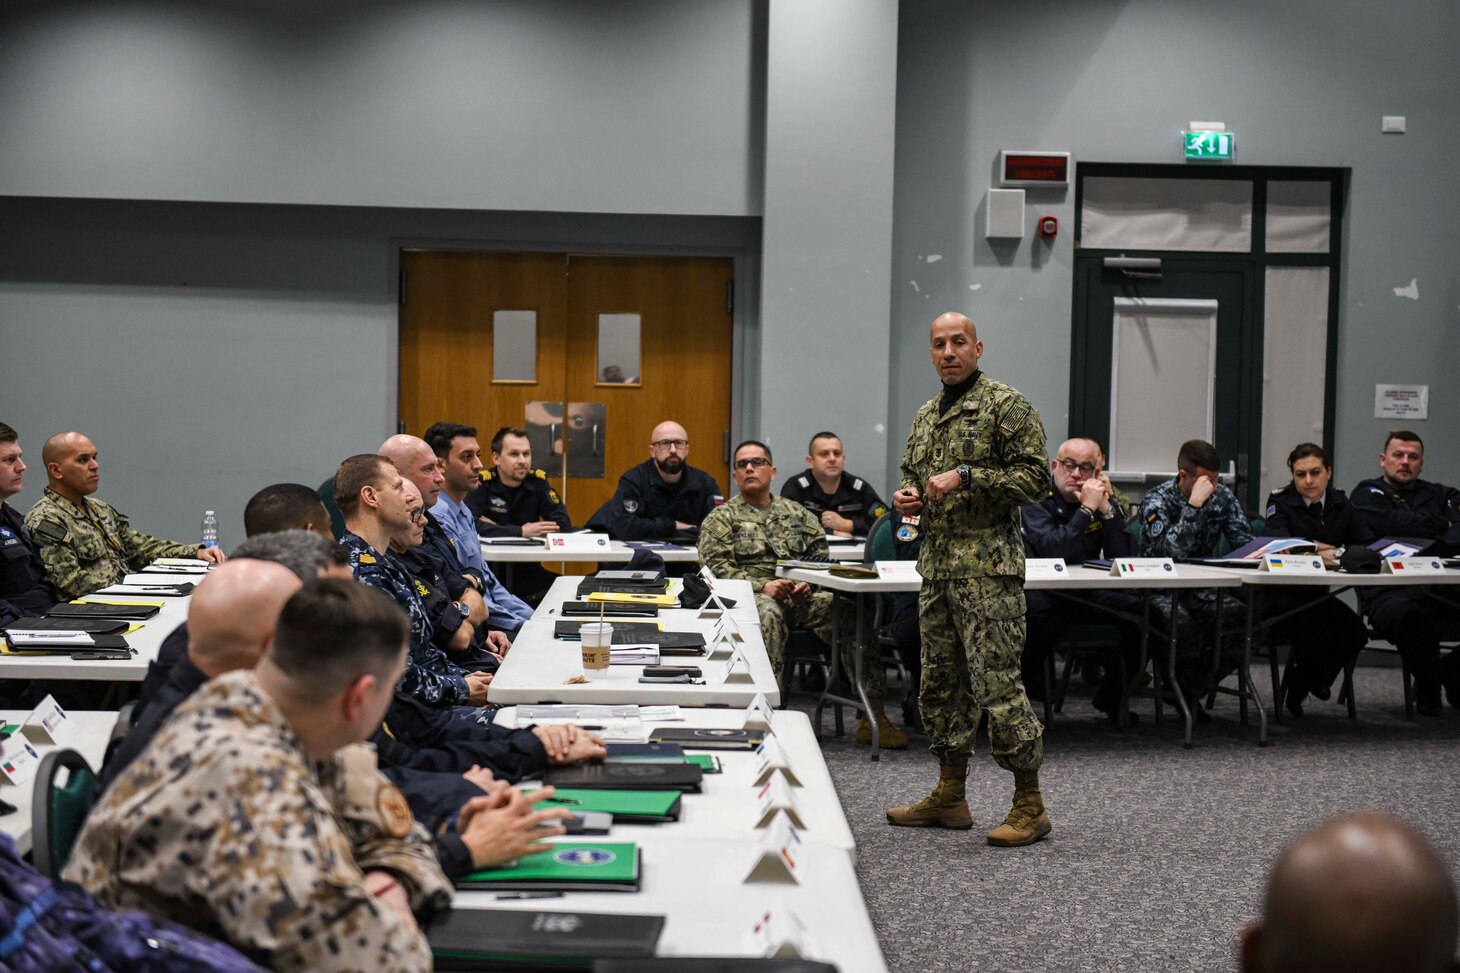 Naval Forces Europe-Africa Fleet Master Chief Derrick Walters speaks to senior enlisted leaders from 17 different nations during the Europe-Africa Senior Enlisted Leadership Symposium, held at Naval Support Activity Naples, Italy, Feb. 17, 2020.